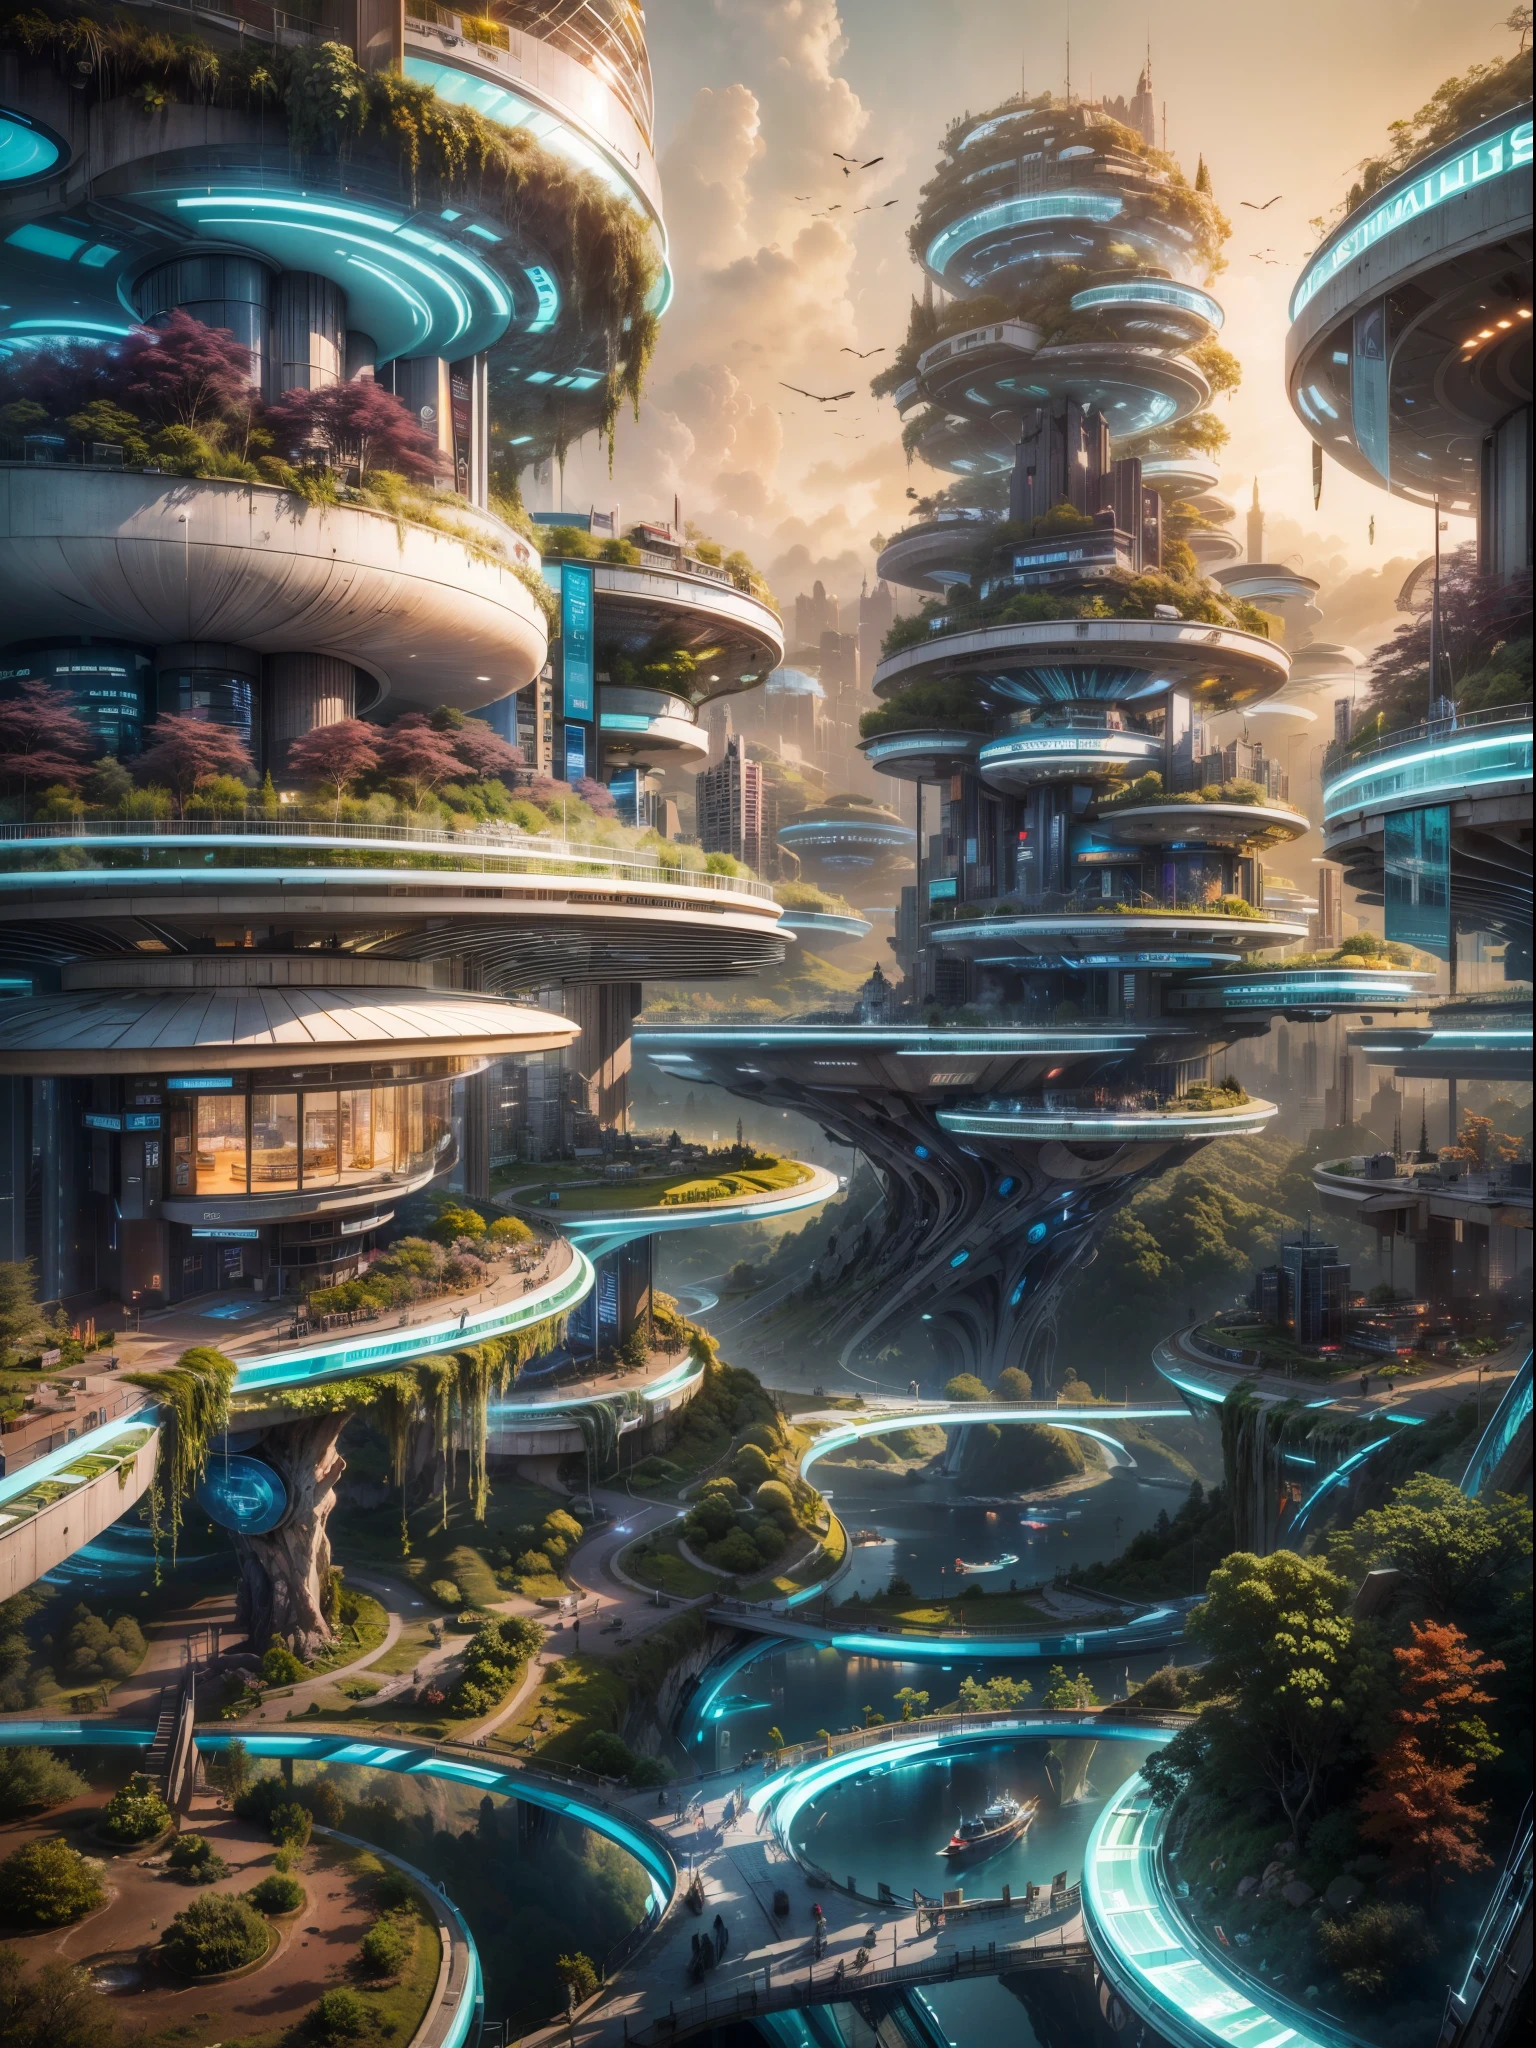 (best quality,4k,8k,highres,masterpiece:1.2),ultra-detailed,(realistic,photorealistic,photo-realistic:1.37),futuristic floating city,futuristic technology,city on a gigantic high-tech flat platform,airship,floating in the sky,futuristic city,small airship around,high-tech half-sphere platform,colorful lights,advanced architecture,modern buildings,skyscrapers,reaching the clouds,awe-inspiring view,urban landscape,impressive design,seamless integration with nature,dynamic and vibrant atmosphere,futuristic transport system,hovering vehicles,transparent pathways,lush greenery,hanging gardens,cascading waterfalls,magnificent skyline,reflection on the water,sparkling river,architectural innovation,futuristic skyscrapers,transparent domes,unusual shaped buildings,elevated walkways,impressive skyline,glowing lights,futuristic technology,minimalist design,scenic viewpoints,panoramic view,cloud-piercing towers,vibrant colors,epic sunrise,epic sunset,dazzling display of lights,magical ambiance,city of the future,urban utopia,luxurious lifestyle,innovative energy sources,sustainable development,smart city technology,advanced infrastructure,tranquil atmosphere,harmonious coexistence of nature and technology,awe-inspiring cityscape,unprecedented urban planning,seamless connection between buildings and nature,high-tech metropolis,cutting-edge engineering marvels,future of urban living,visionary architectural concepts,energy-efficient buildings,harmony with the environment,city floating above the clouds,utopian dreams turned reality,limitless possibilities,advanced transportation network,green energy integration,innovative materials,impressive holographic displays,advanced communication systems,breathtaking aerial views,peaceful and serene surroundings,modernist aesthetics,ethereal beauty